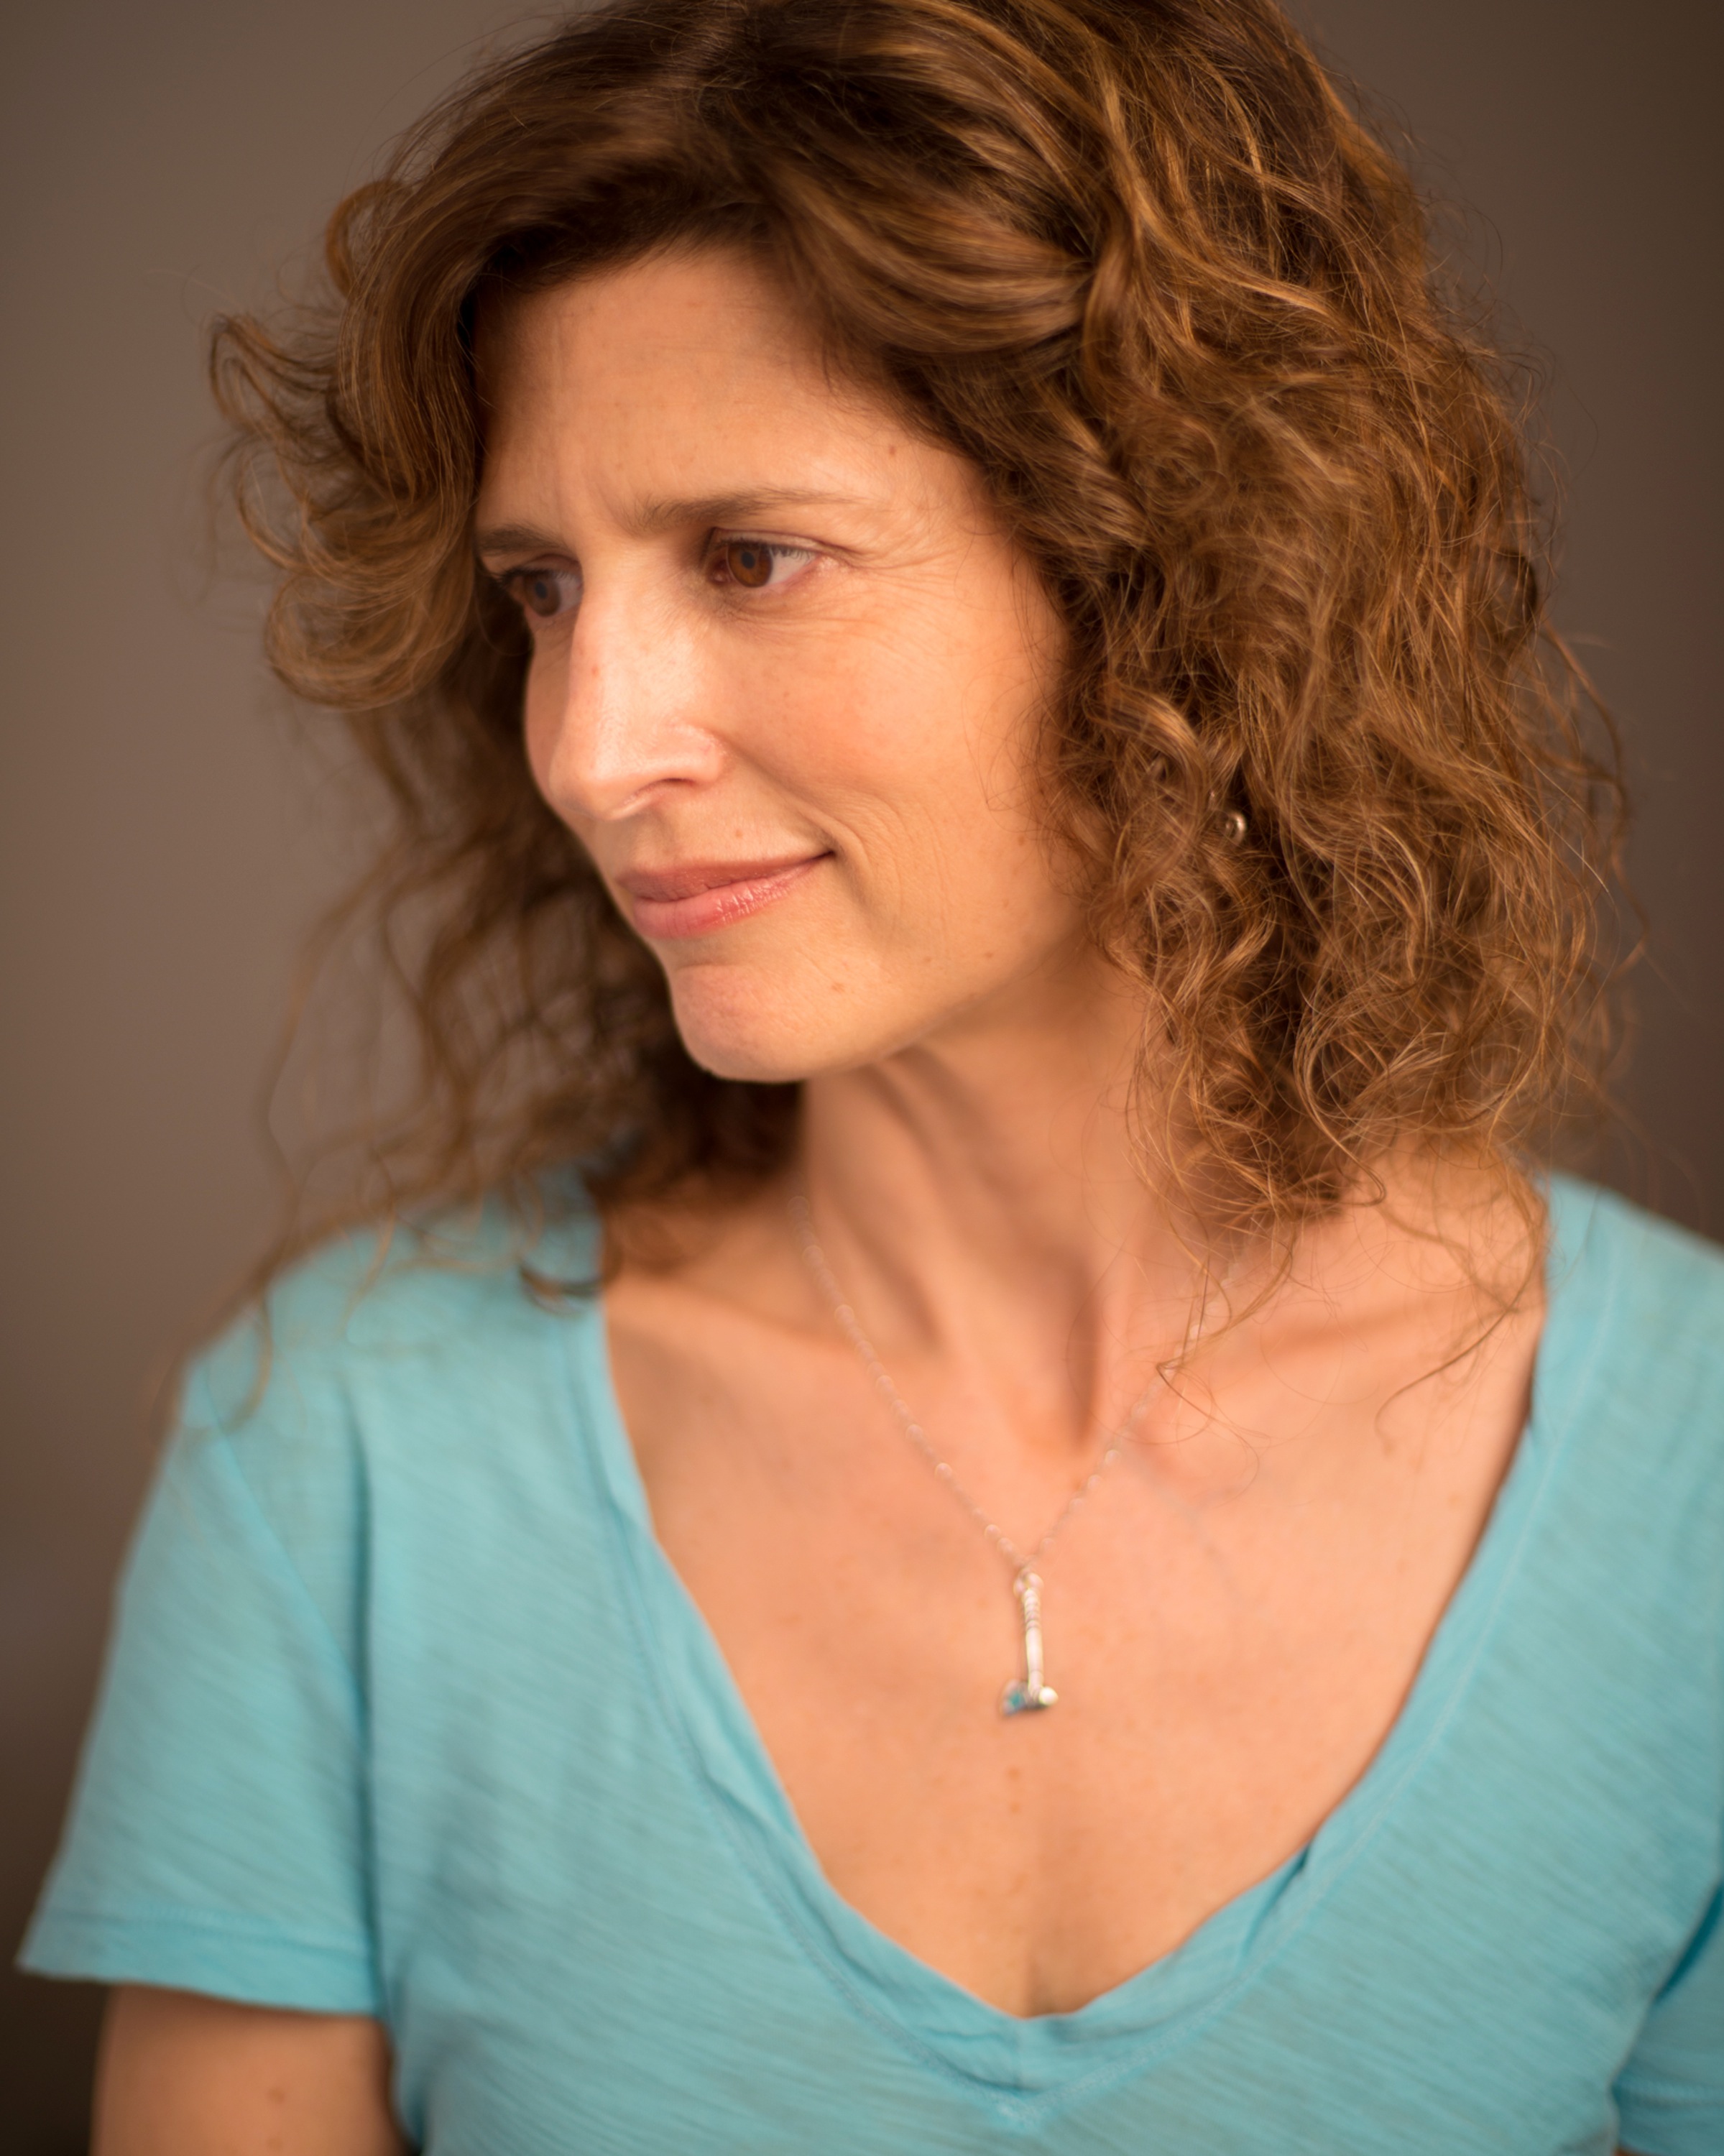 A headshot of a woman with brown wavy hair gazing to the left, wearing a light blue t-shirt. Not smiling.